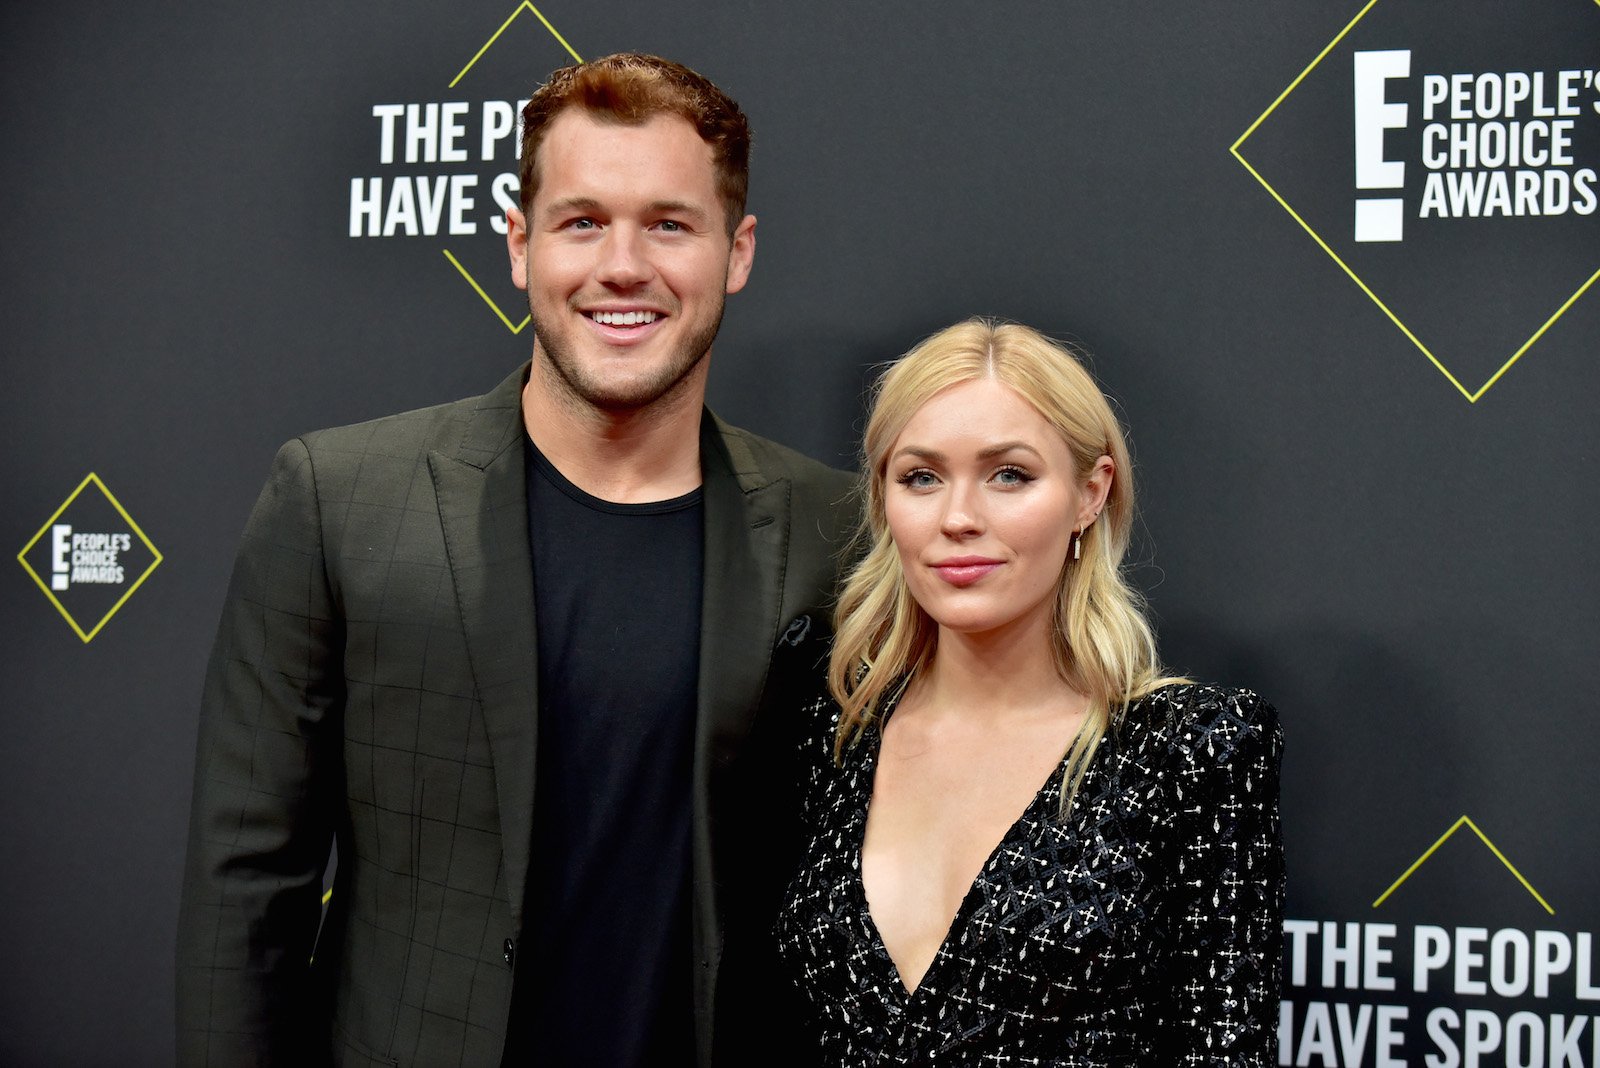 Colton Underwood and Cassie Randolph from 'The Bachelor' attend the 2019 E! People's Choice Awards